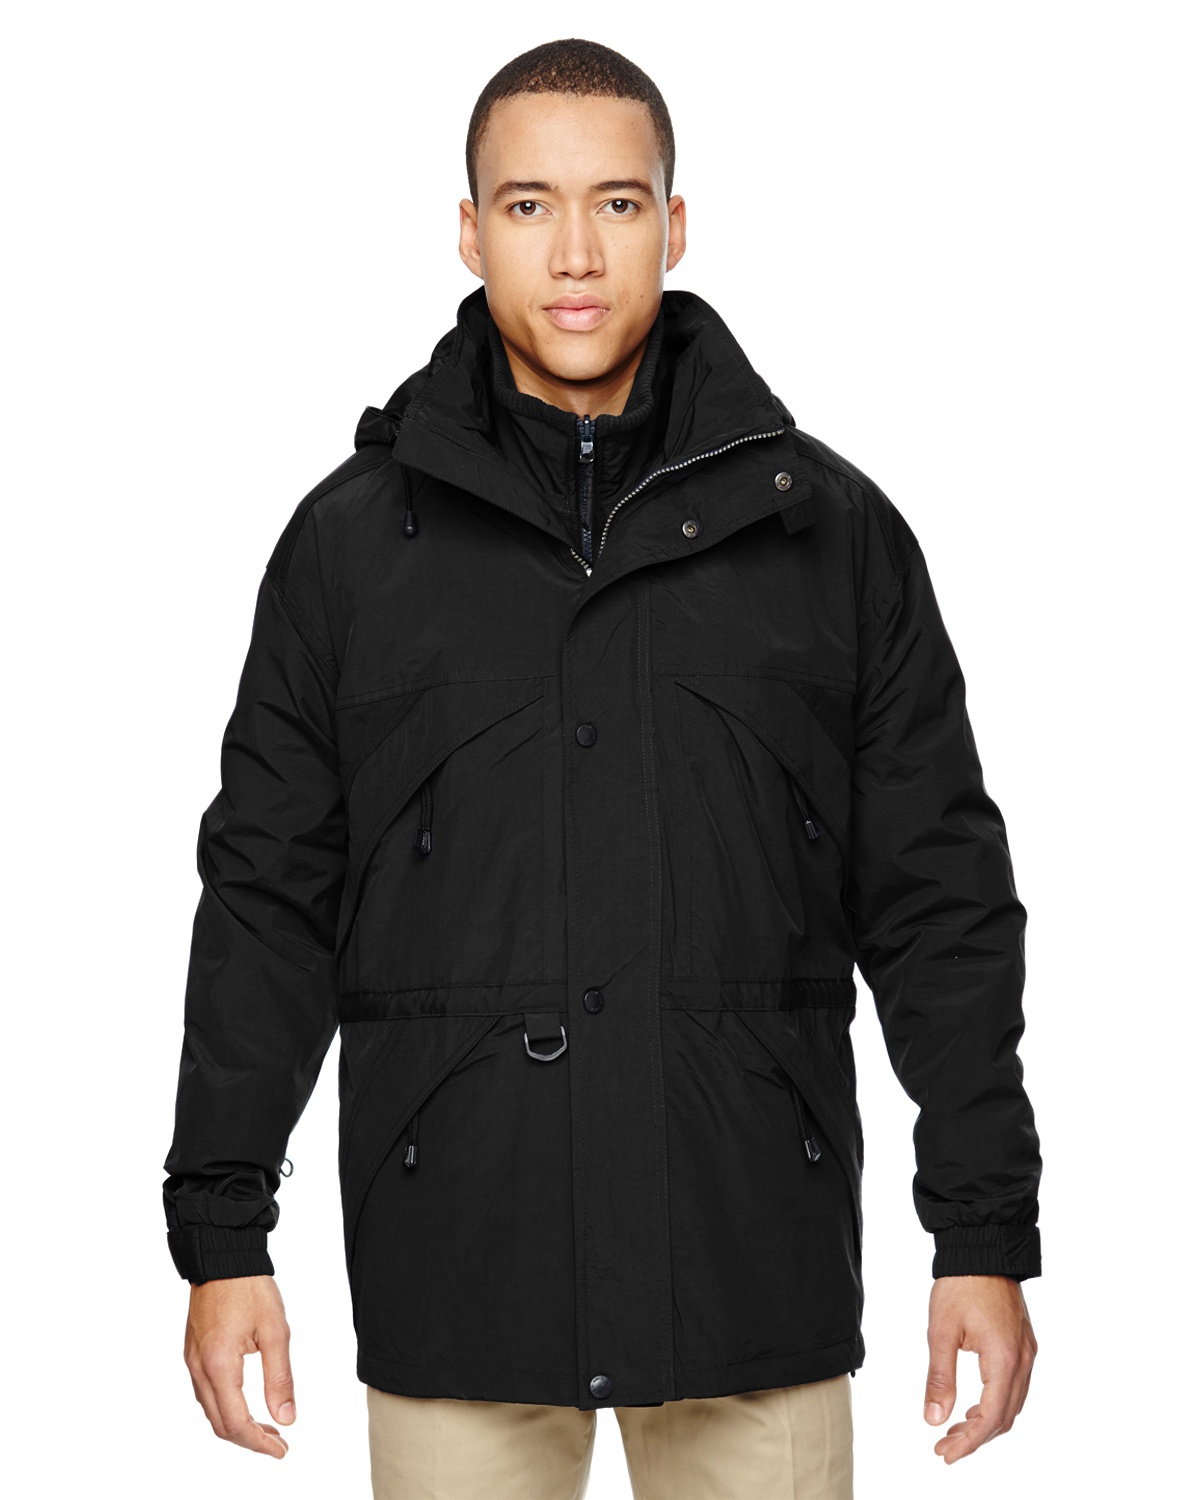 'Ash City North End 88007 Adult 3 in 1 Parka with Dobby Trim'